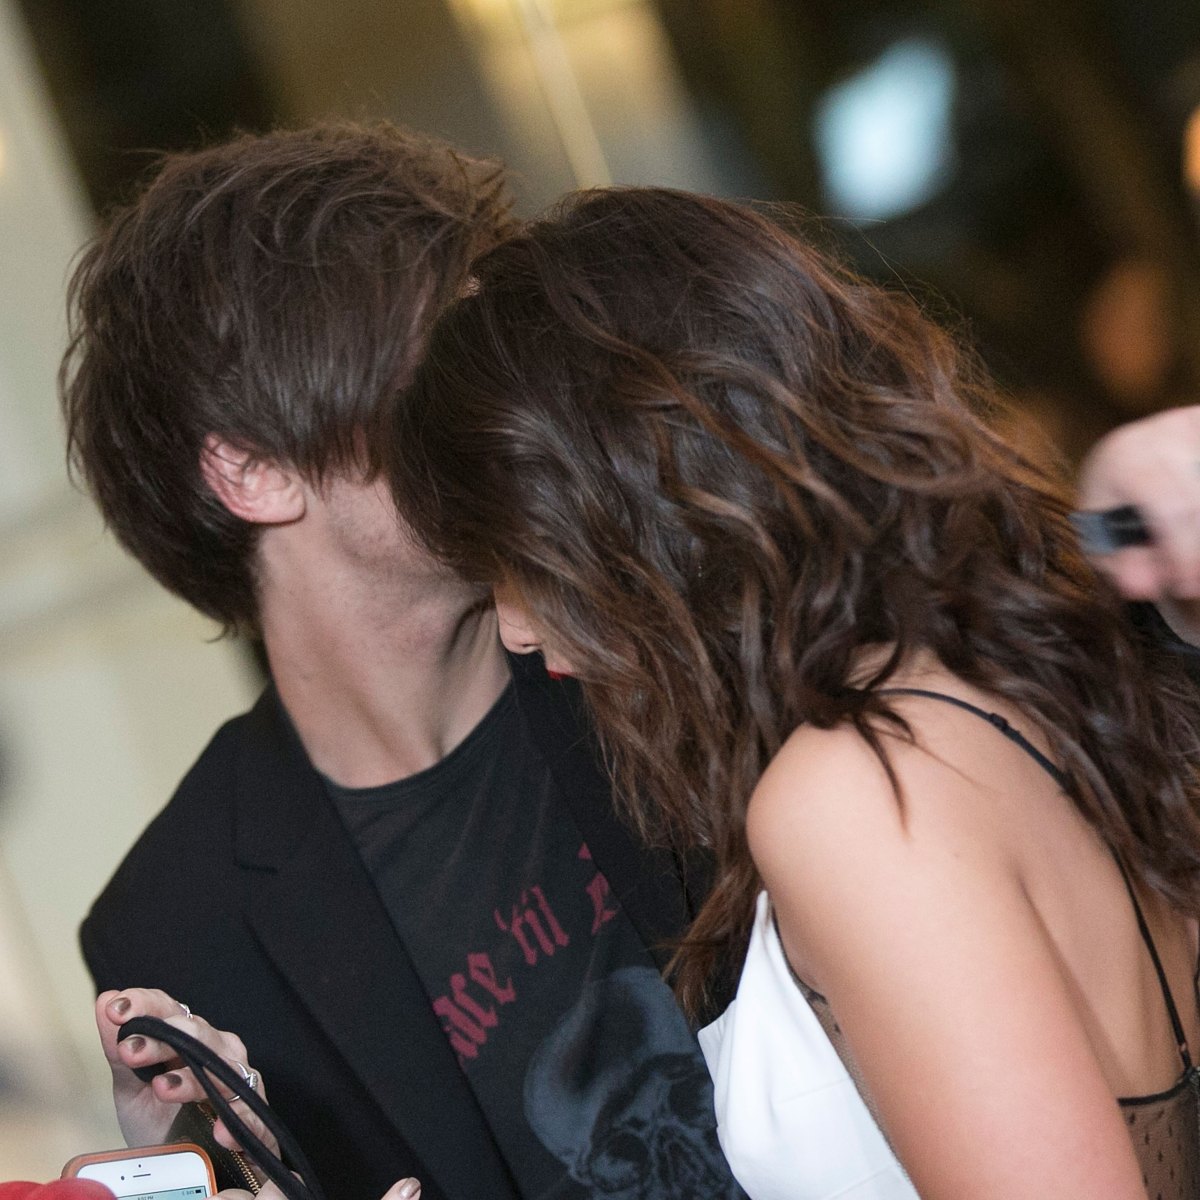 Louis Tomlinson and Danielle Campbell Fuel Romance Rumors During